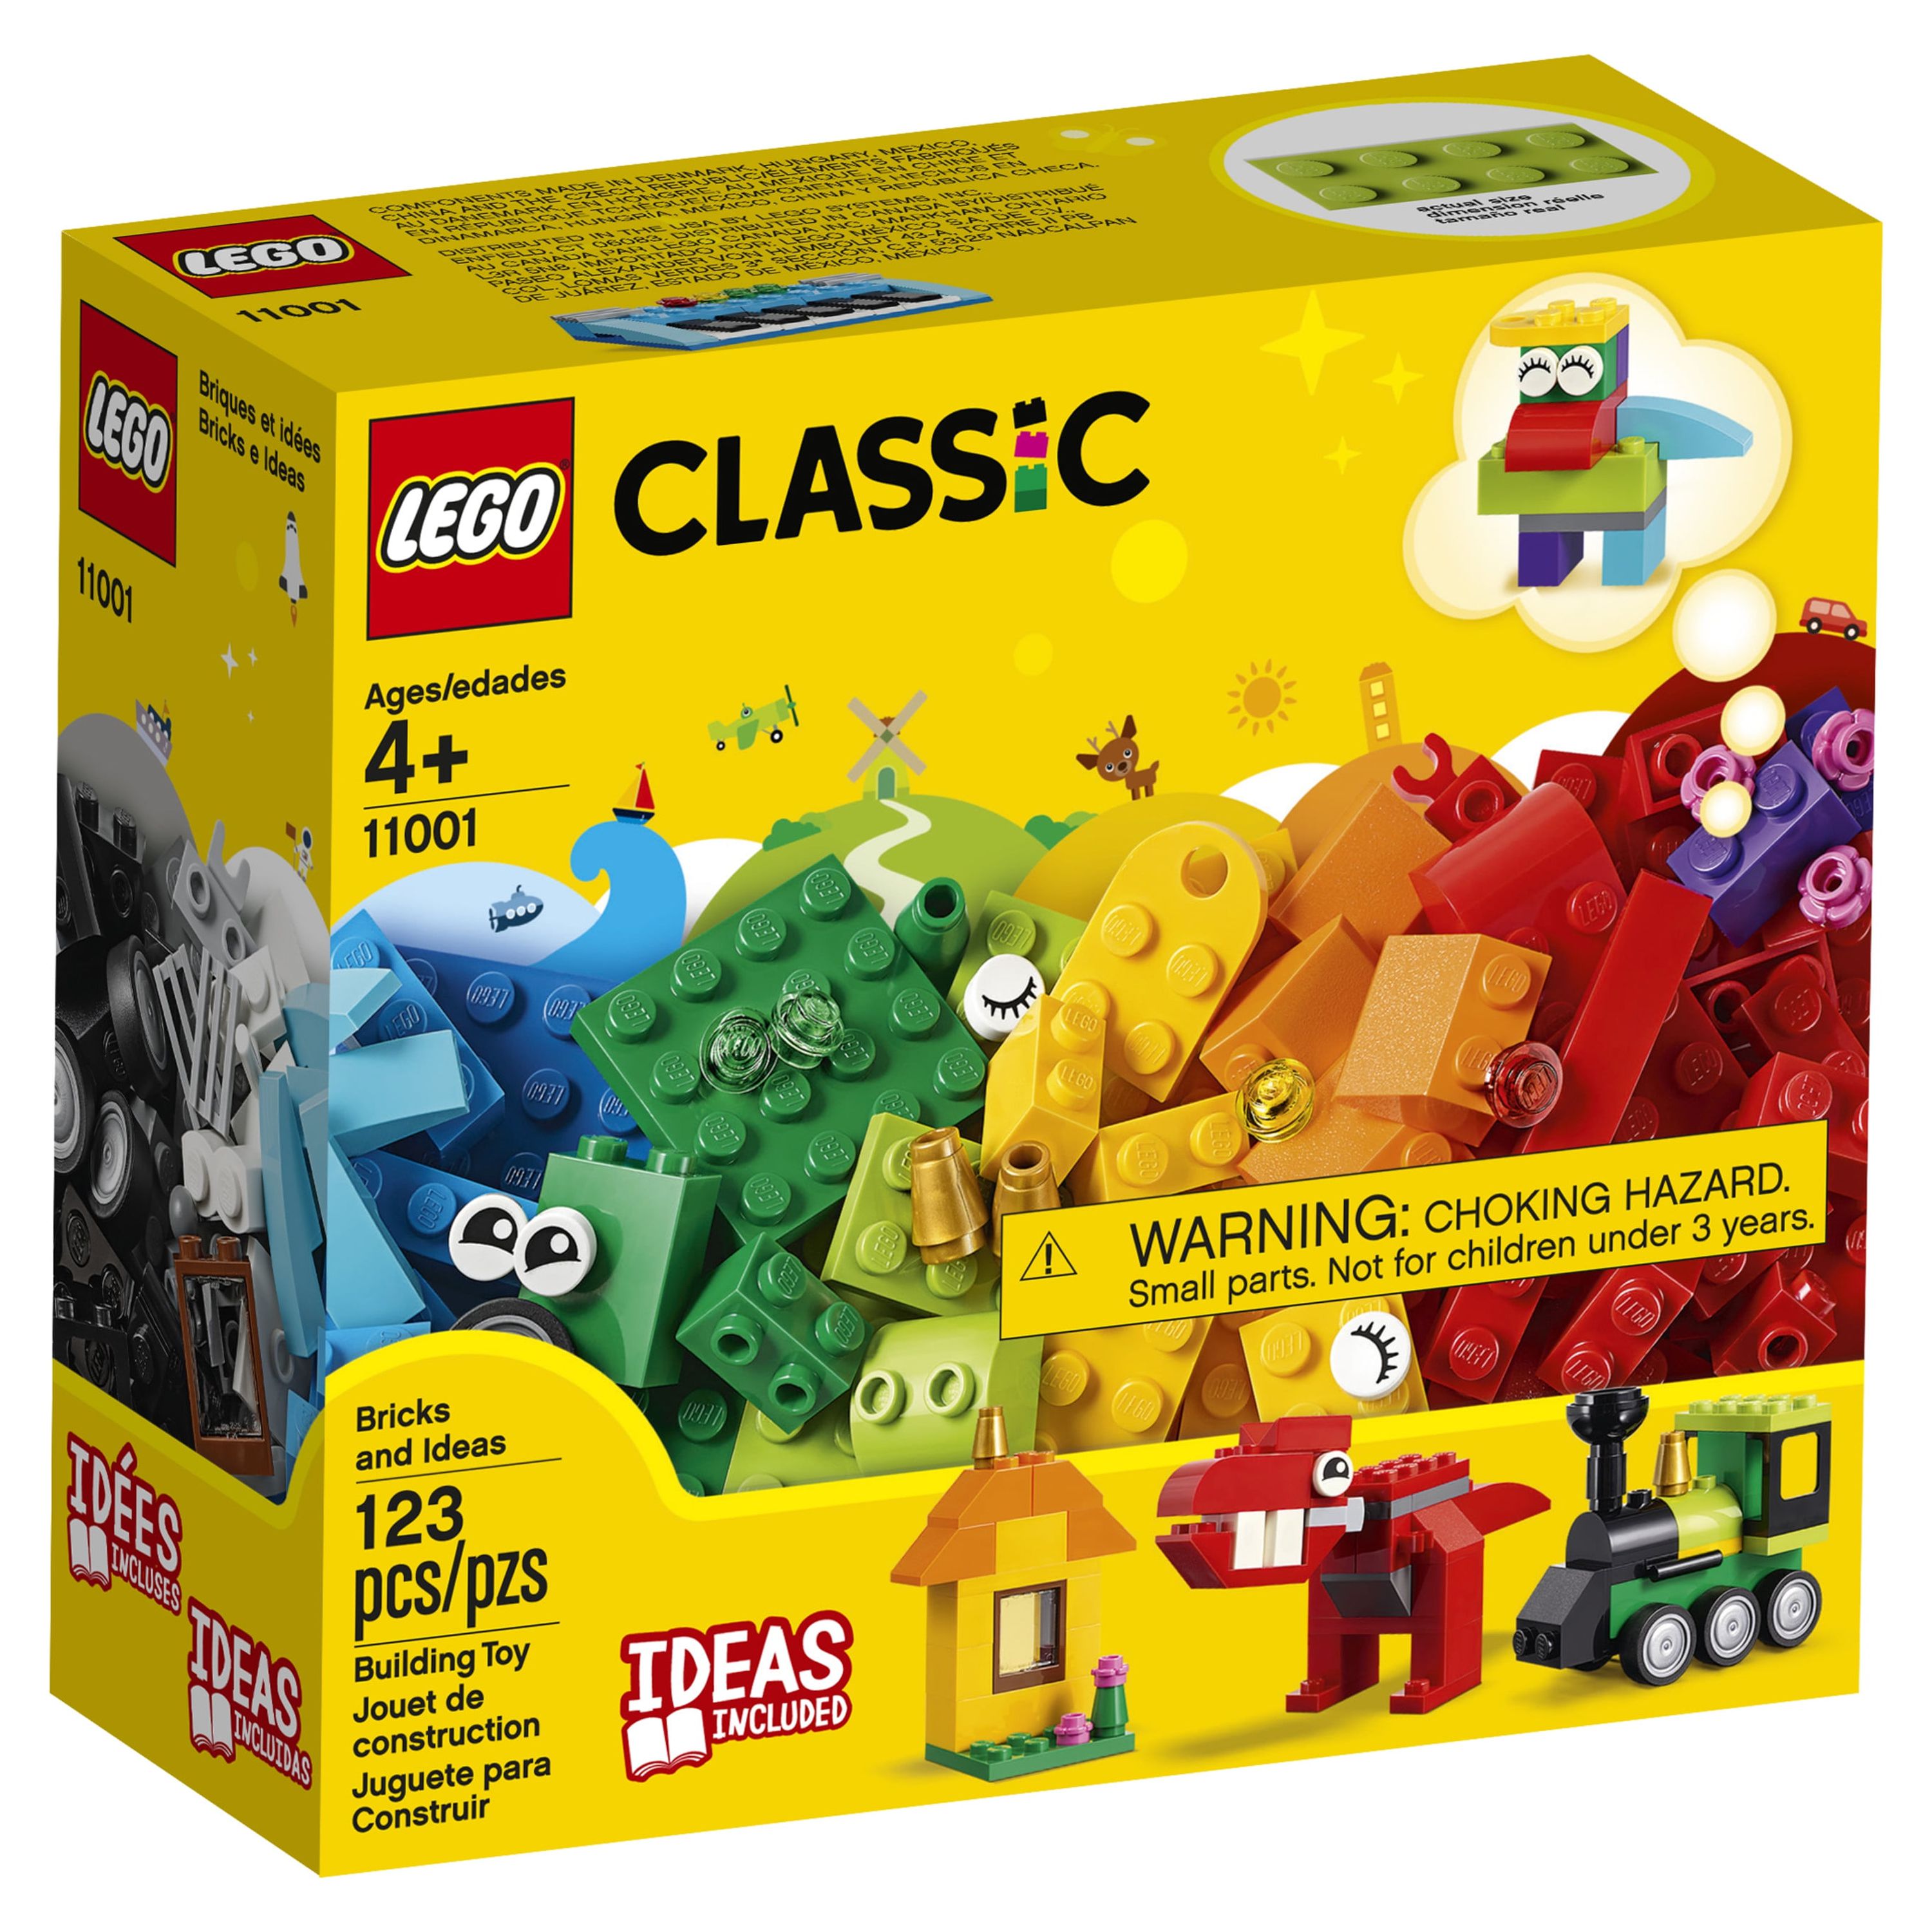 LEGO Classic Bricks and Ideas 11001 (123 Pieces) - image 5 of 6